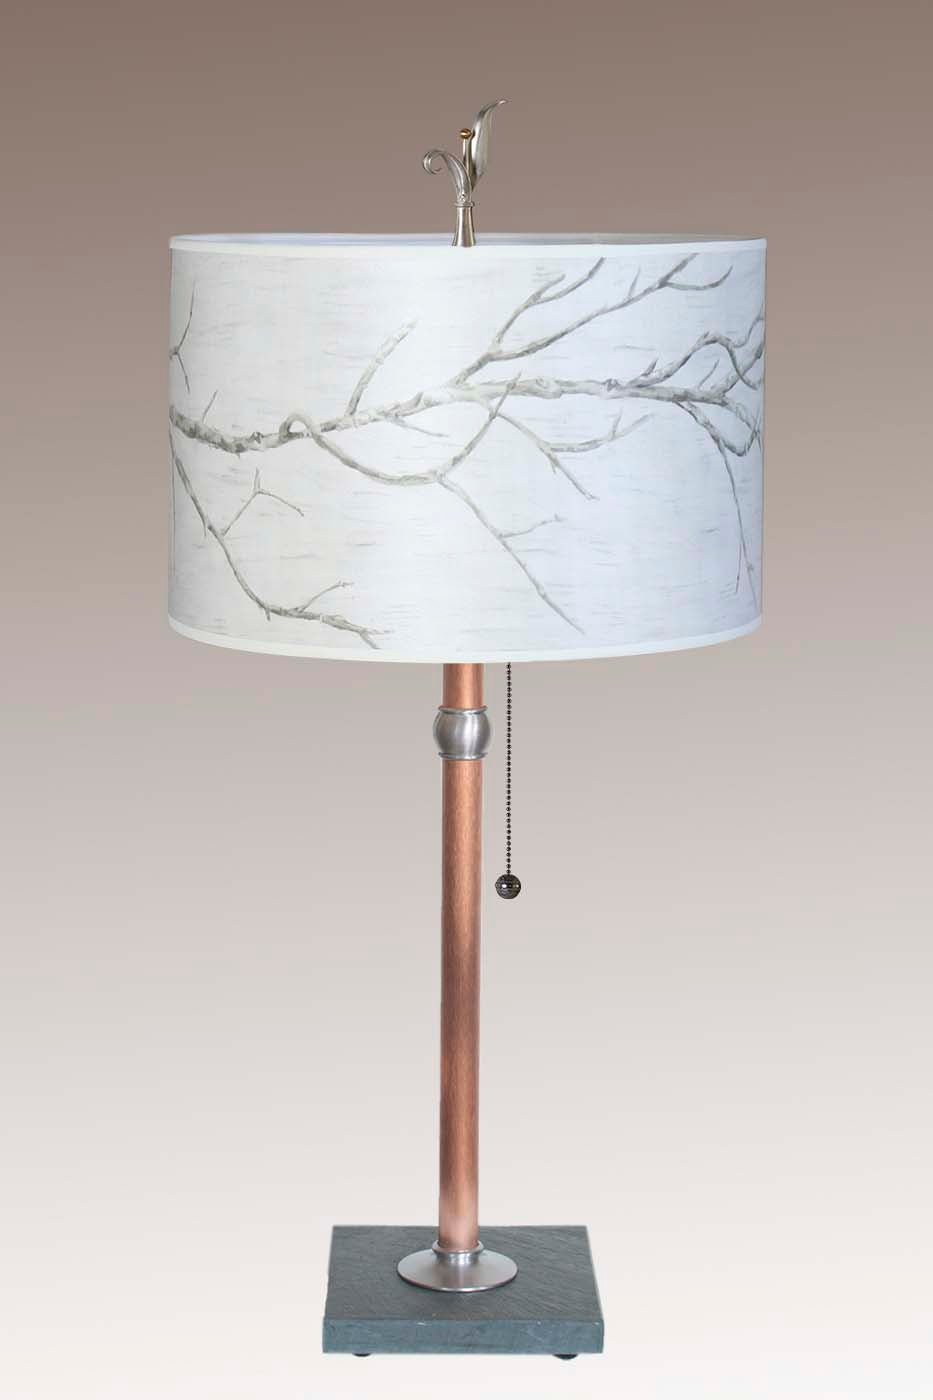 Copper Table Lamp with Large Drum Shade in Sweeping Branch